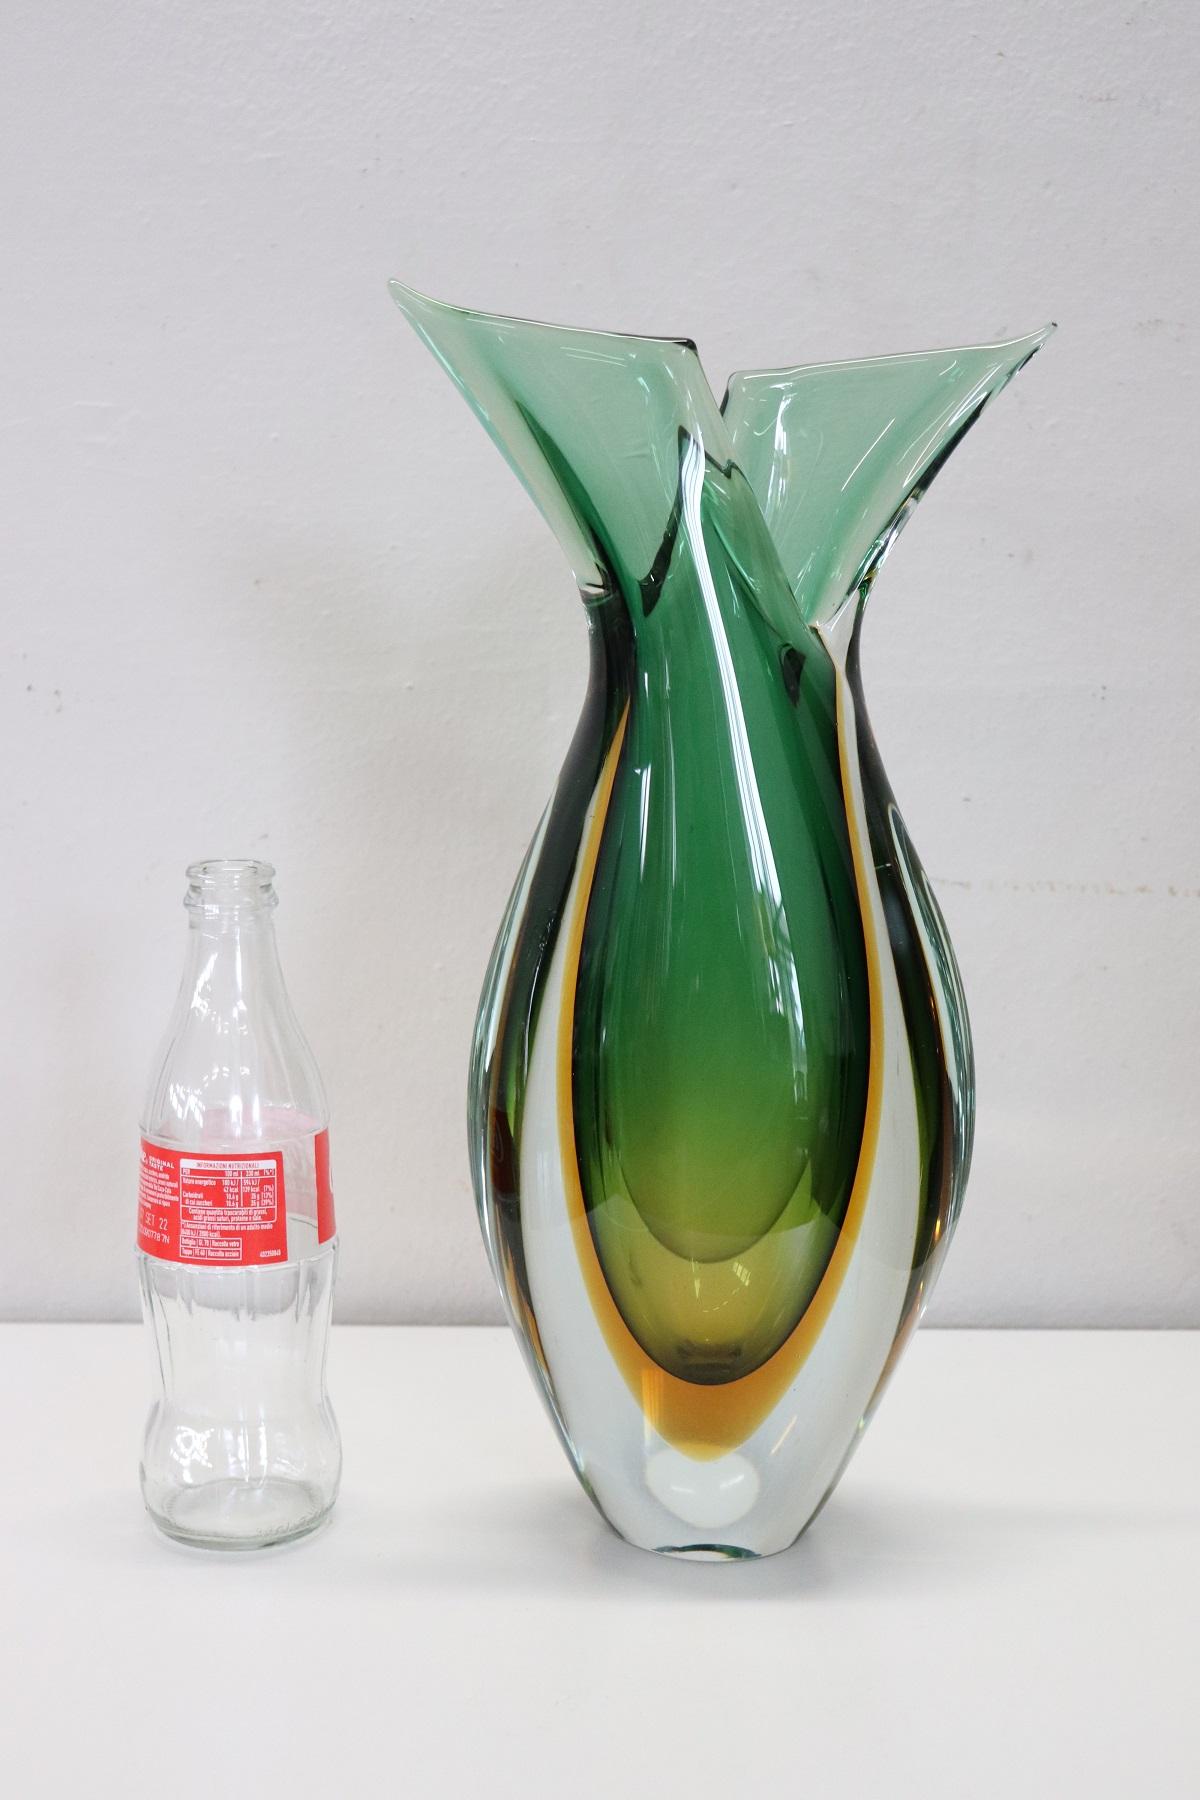 Refined design large vase in submerged Murano glass in shades of yellow and green made by Flavio Poli for Seguso, 1960s. This vase is characterized by a particular design shape. Vase of great refinement you will be truly fascinated when you see it.